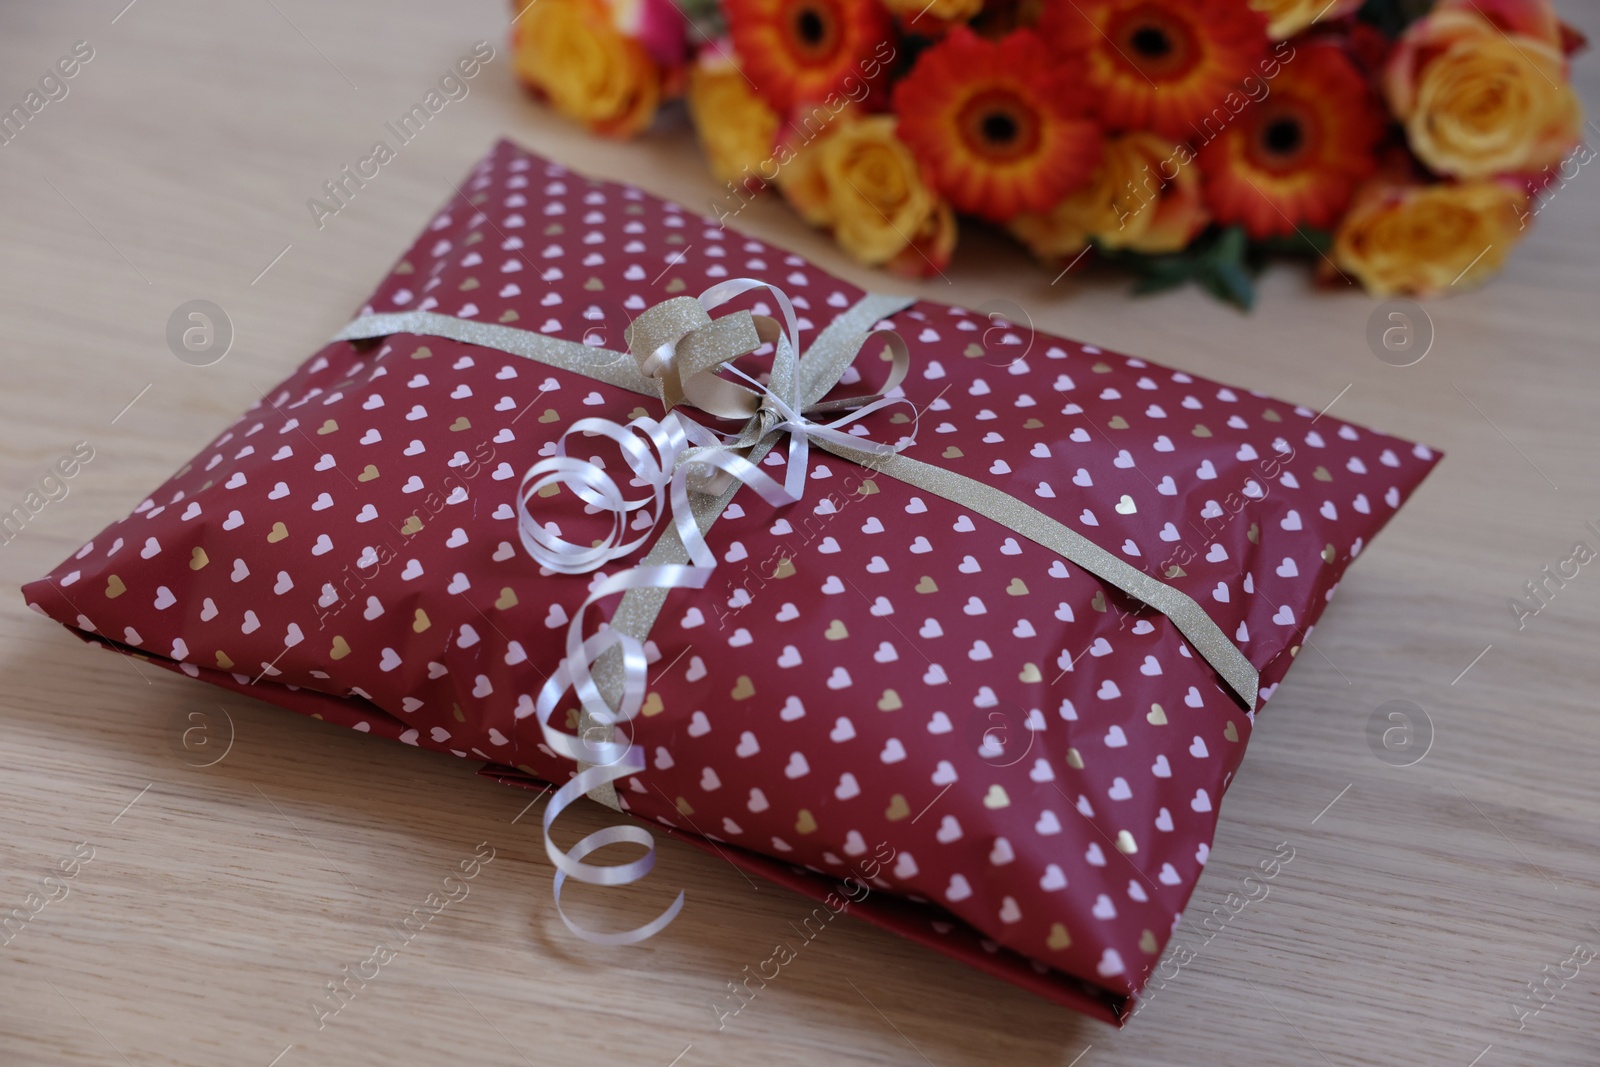 Photo of Parcel wrapped in heart patterned paper and beautiful flowers on wooden table, closeup